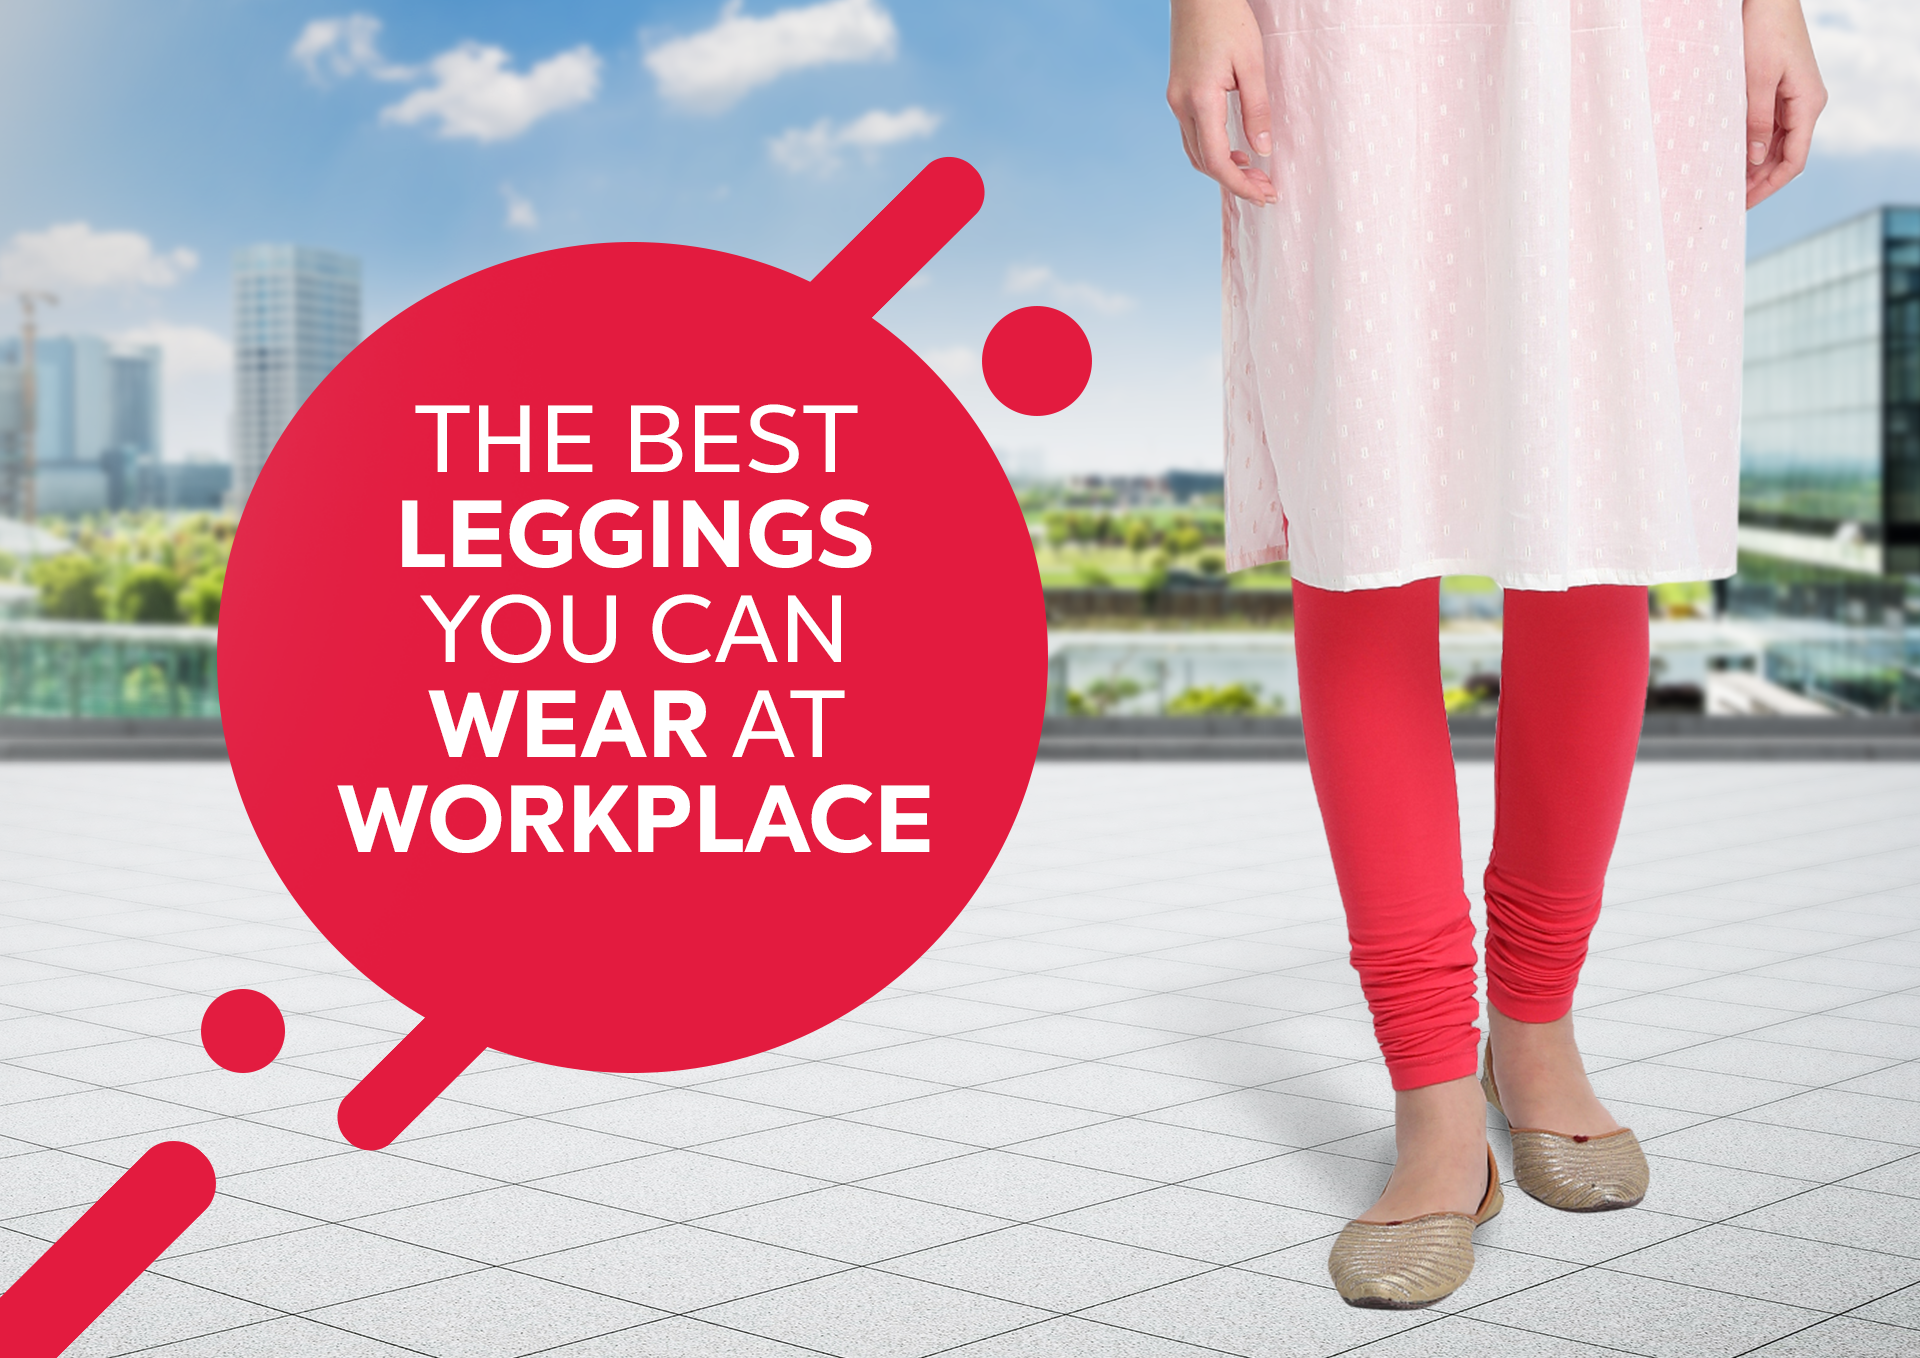 The Best Leggings You Can Wear At Workplace